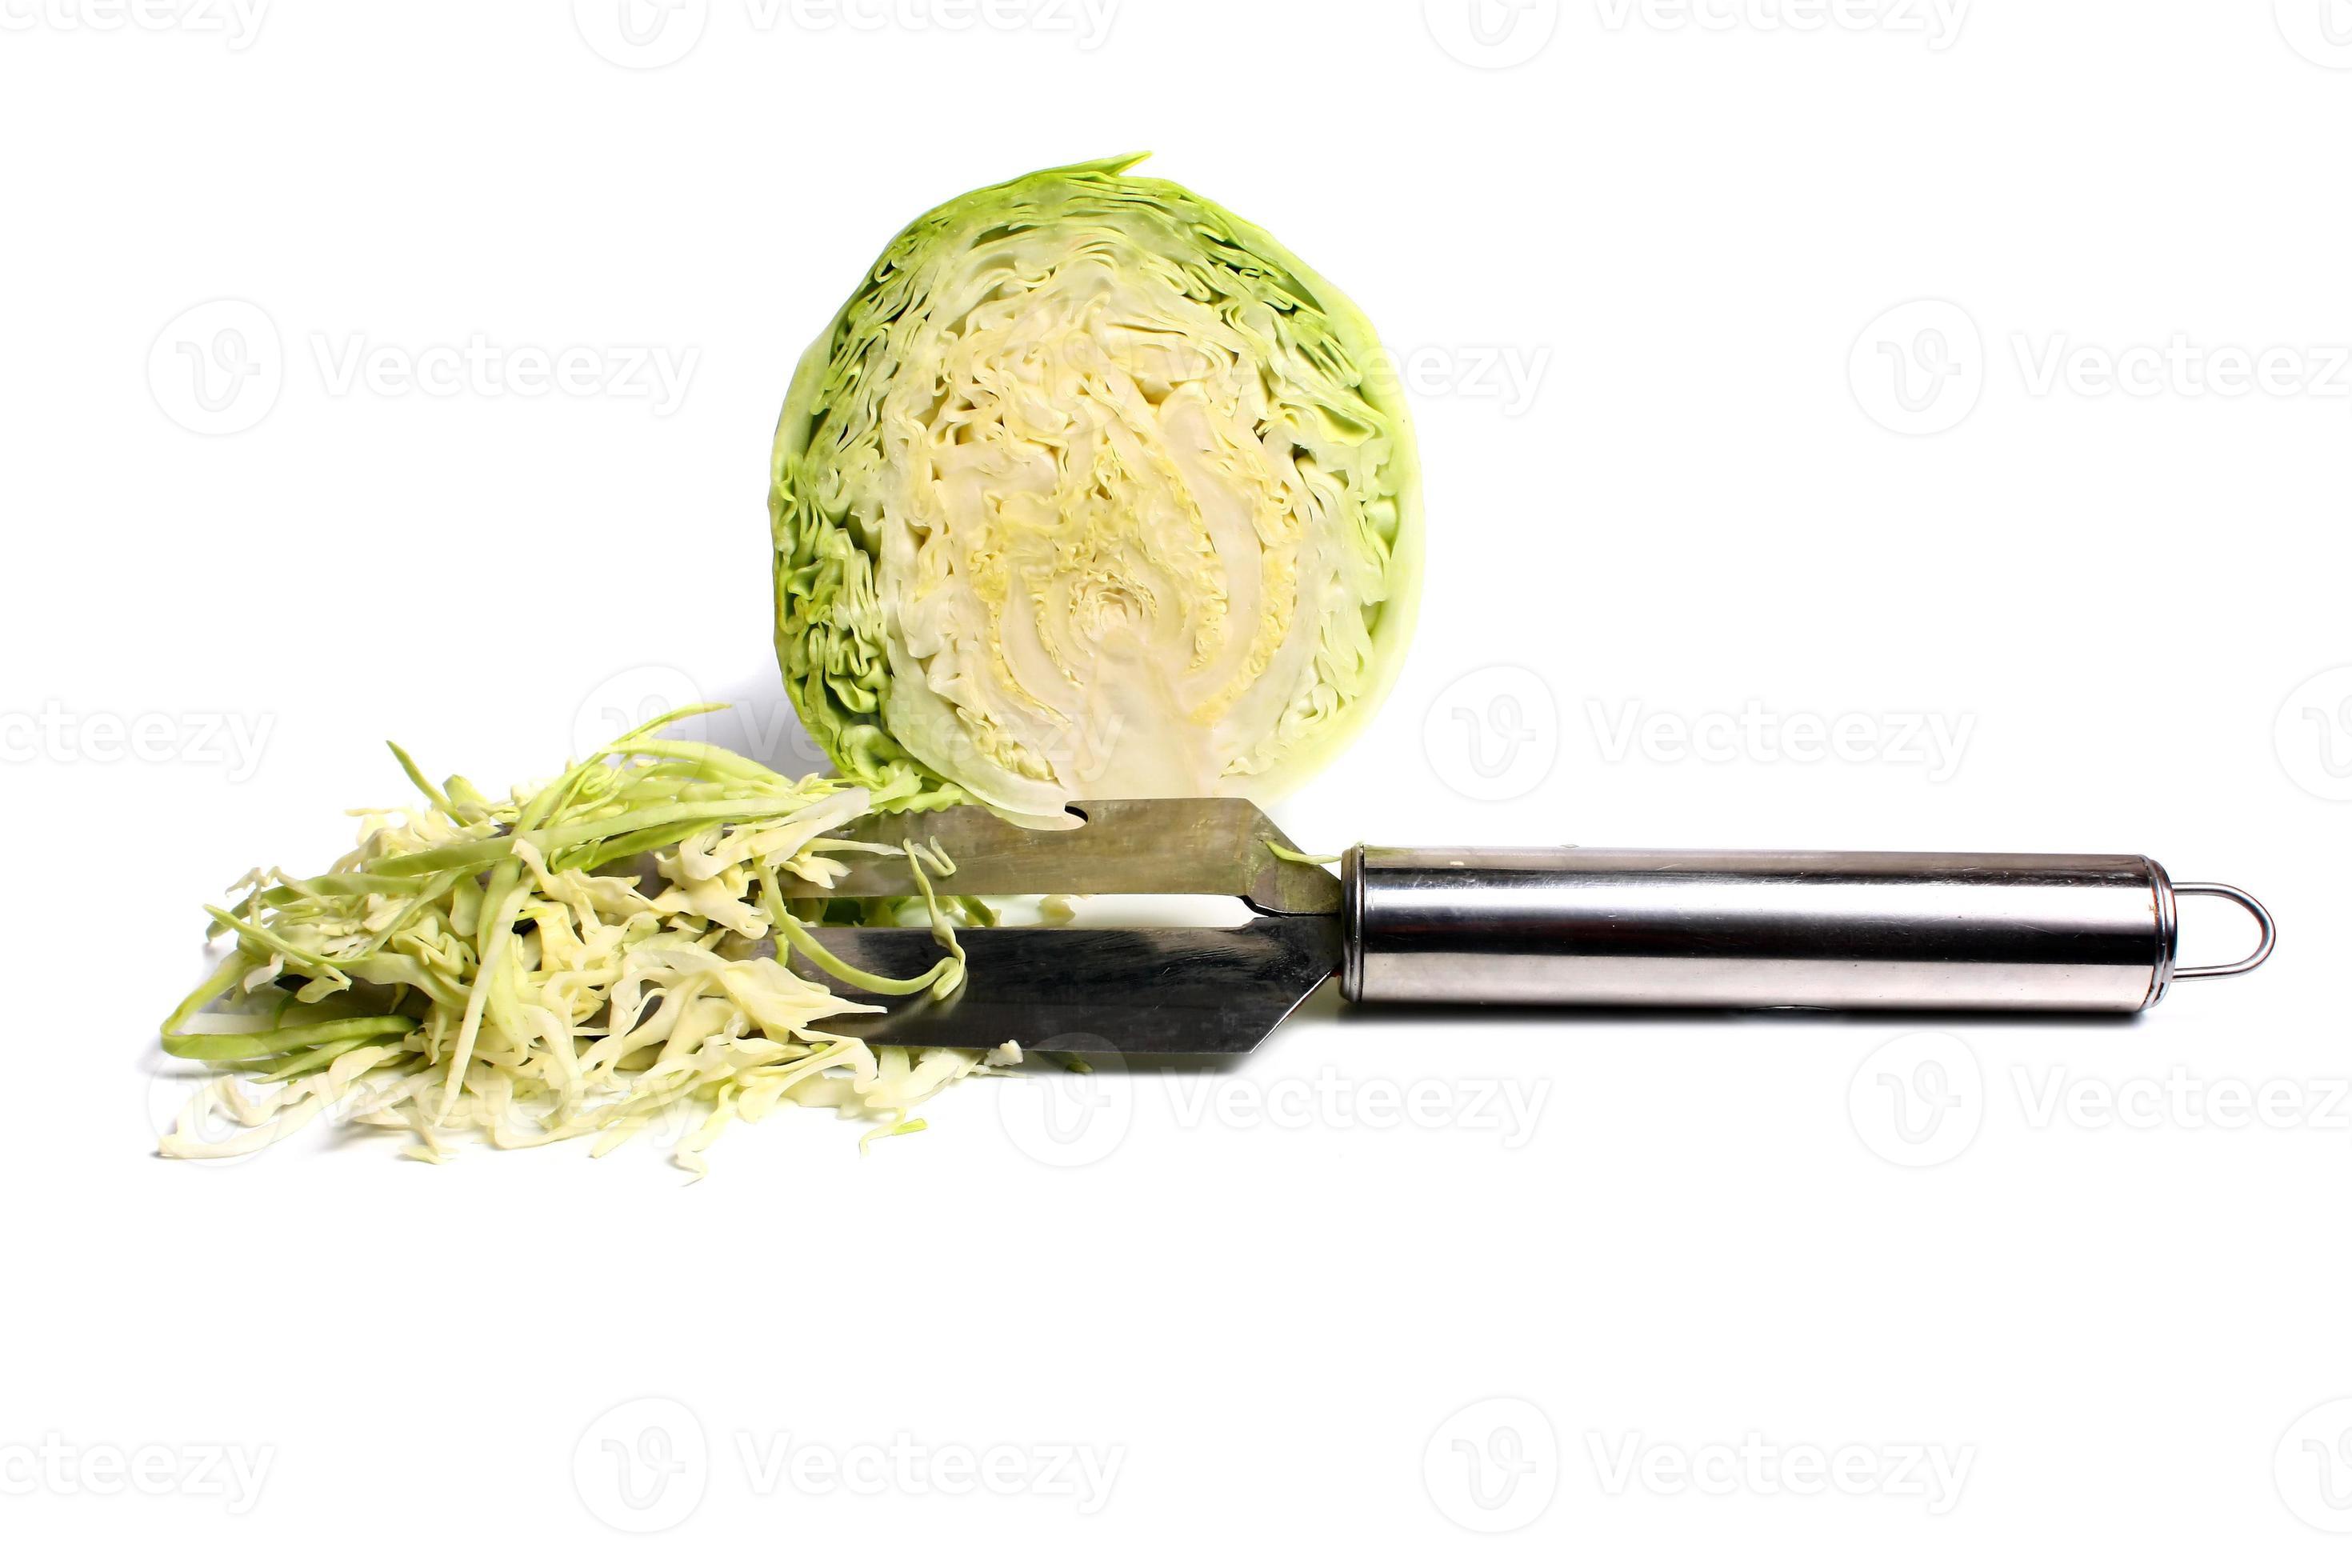 https://static.vecteezy.com/system/resources/previews/007/279/046/large_2x/cut-cabbage-and-knife-photo.JPG